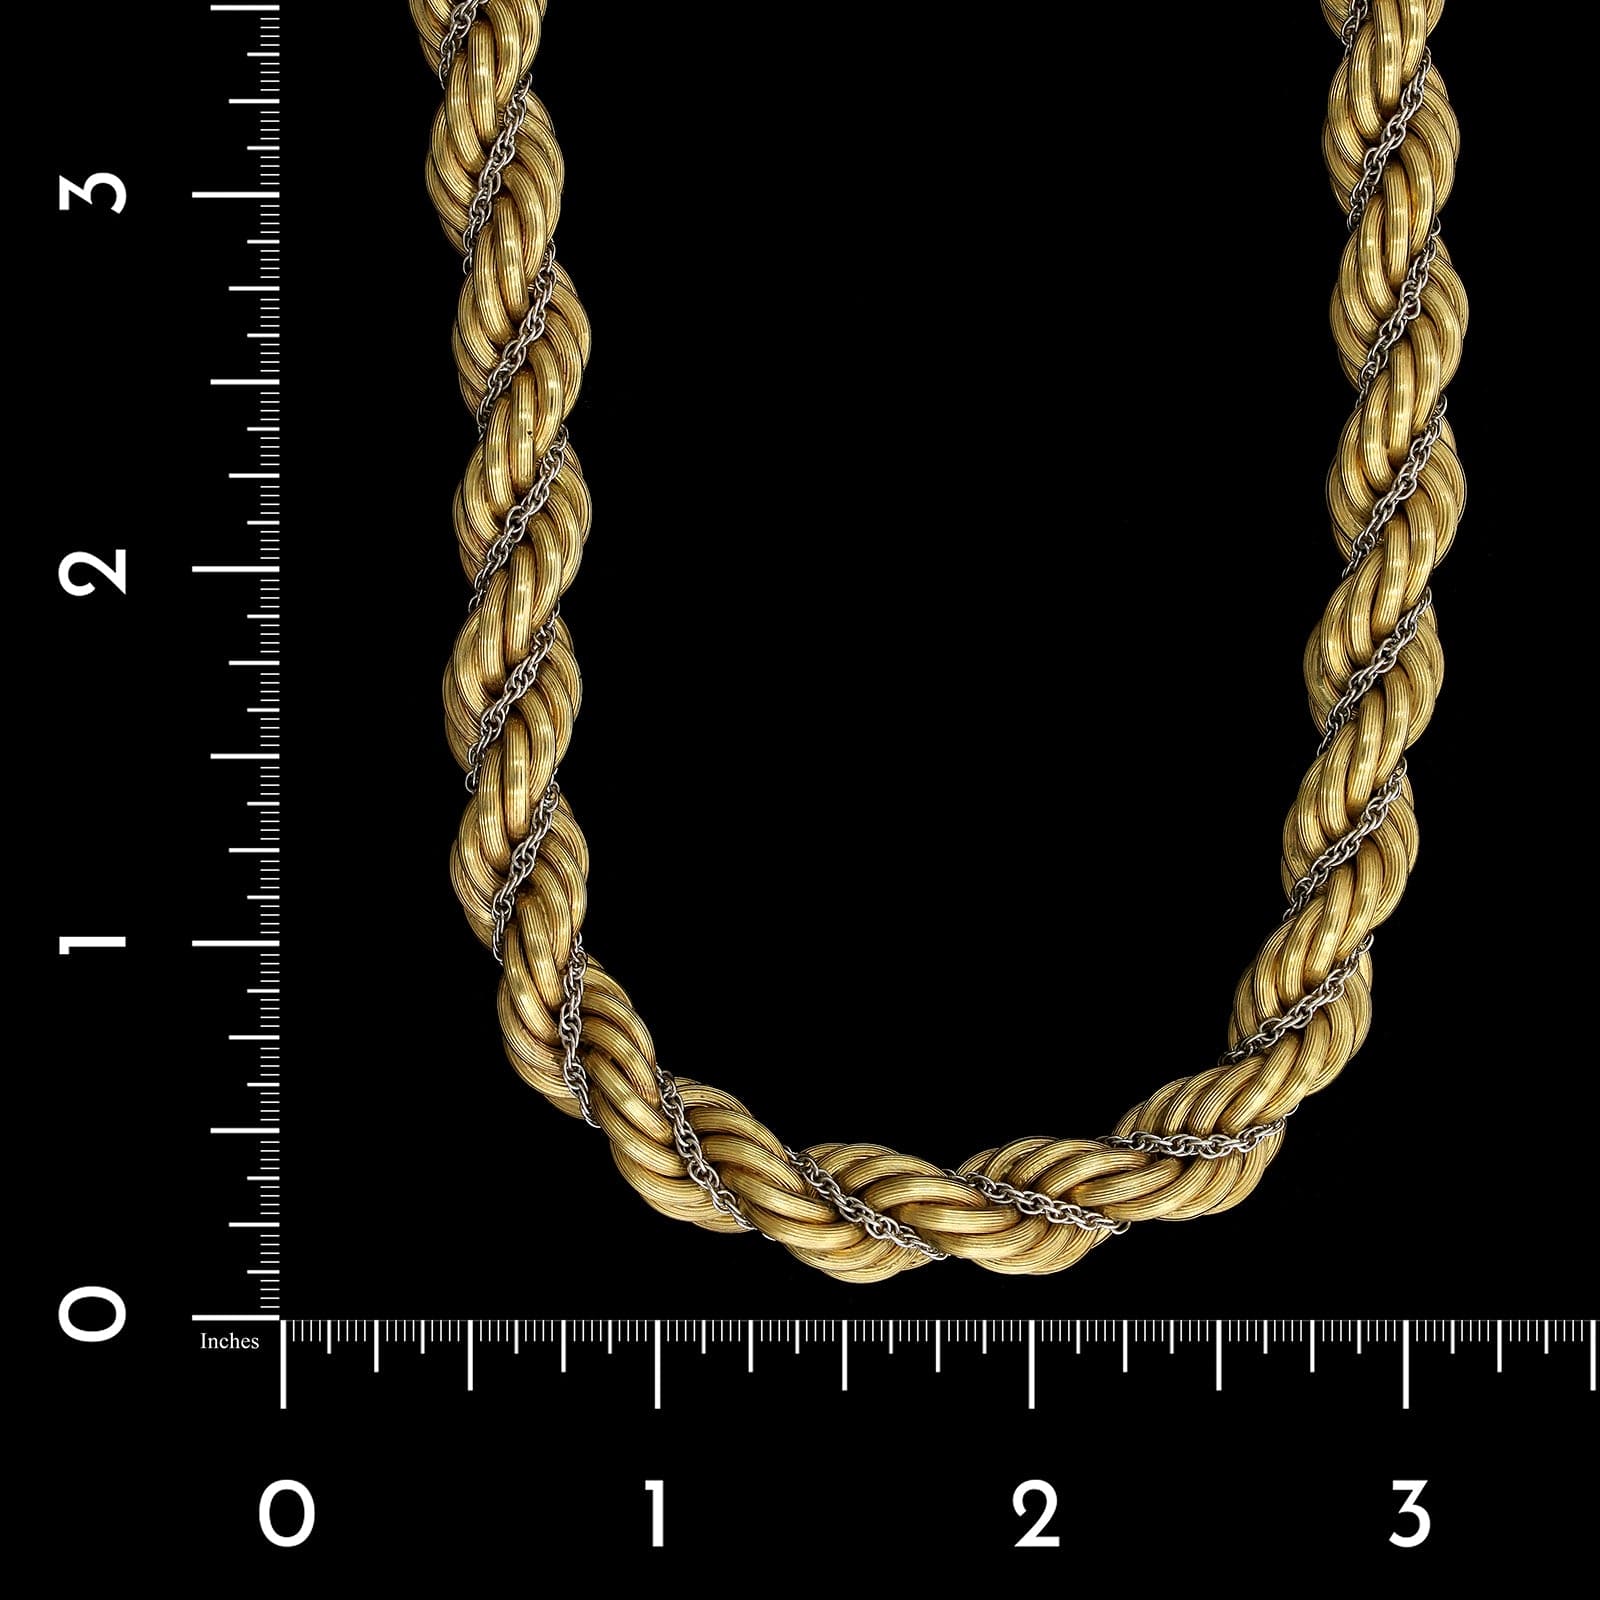 18K Two-tone Gold Estate Twisted Rope Necklace